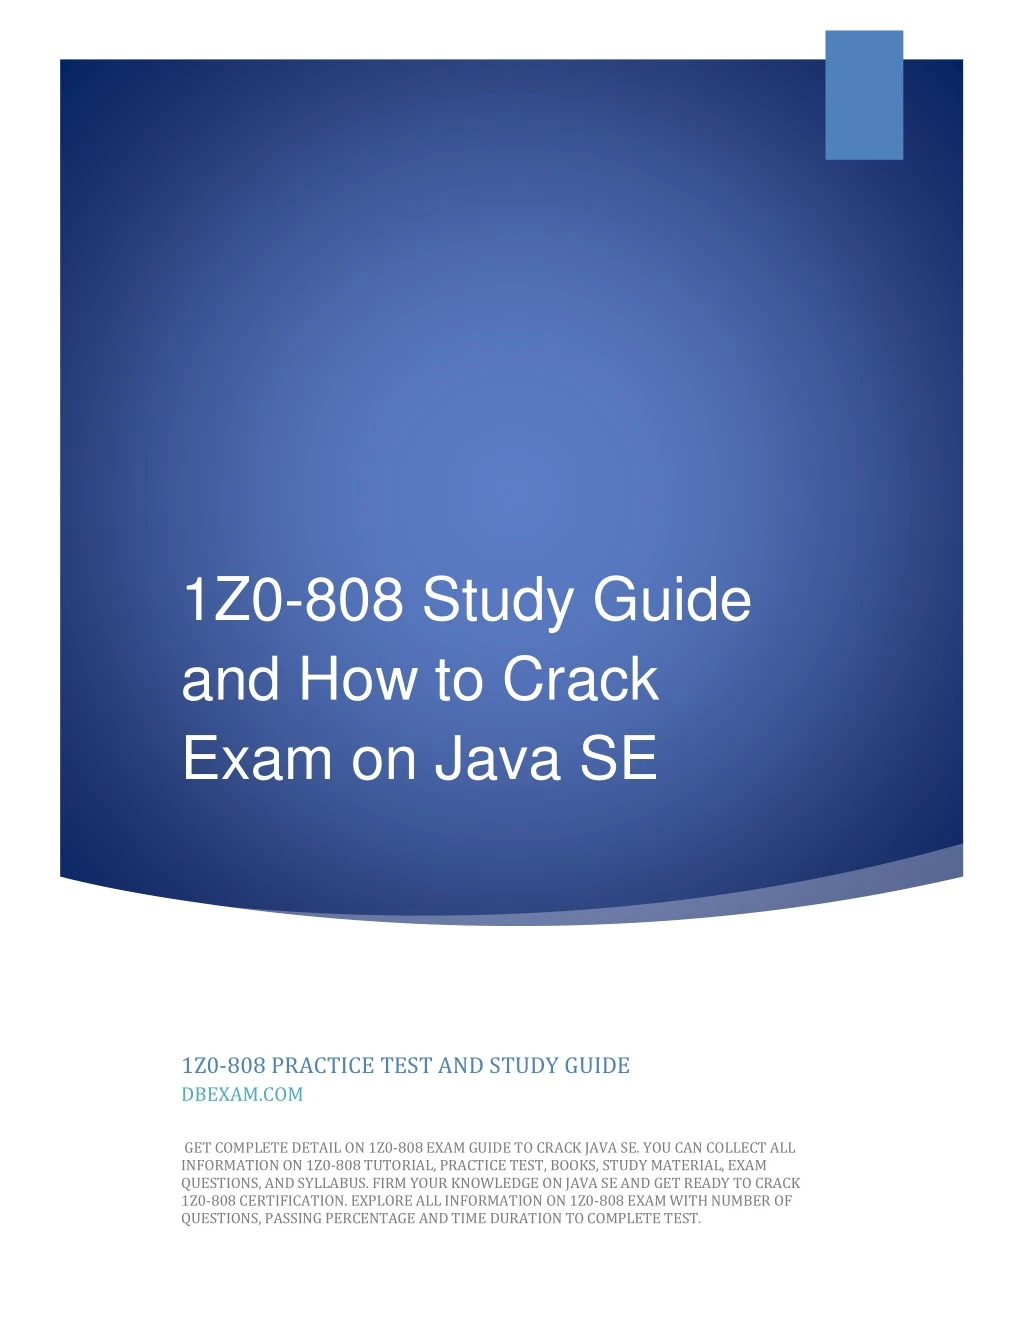 1z0 808 study guide and how to crack exam on java